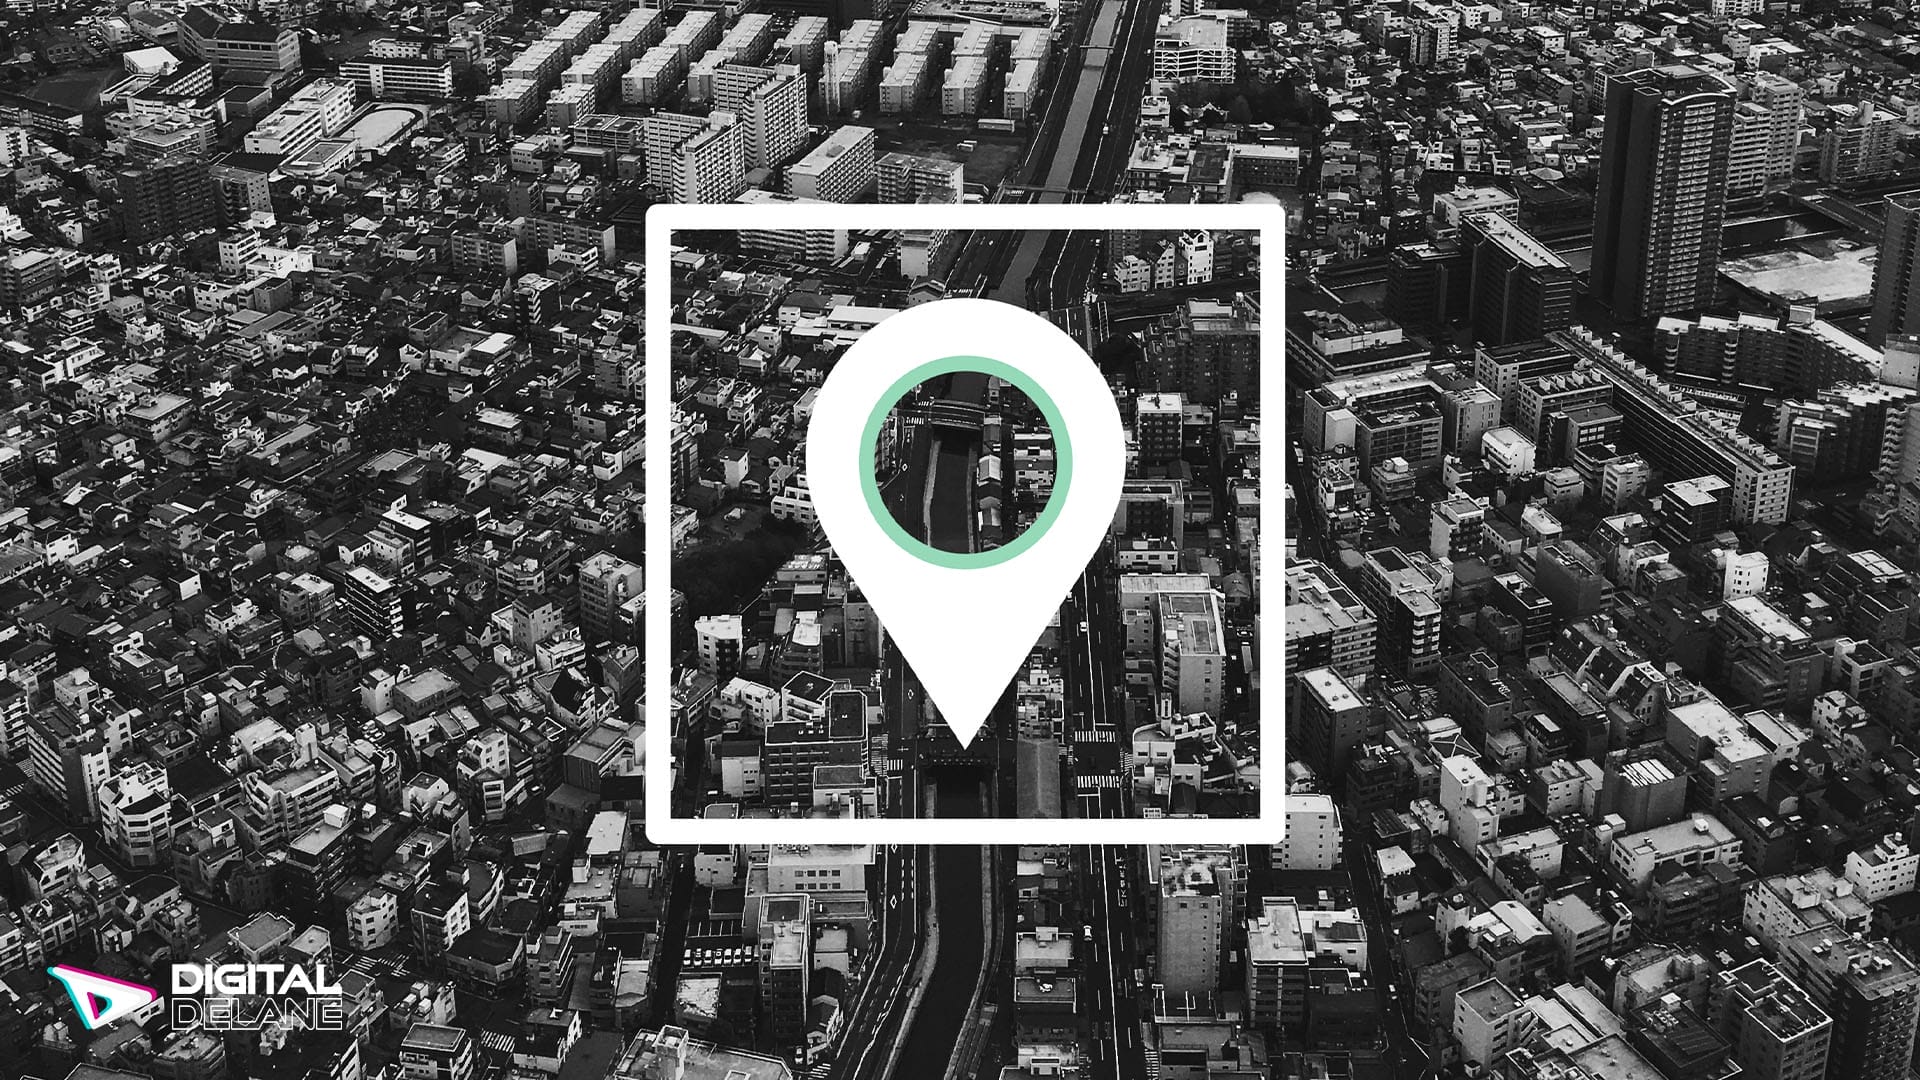 Utilizing Hyperlocal Keywords to Optimize Local Search Results